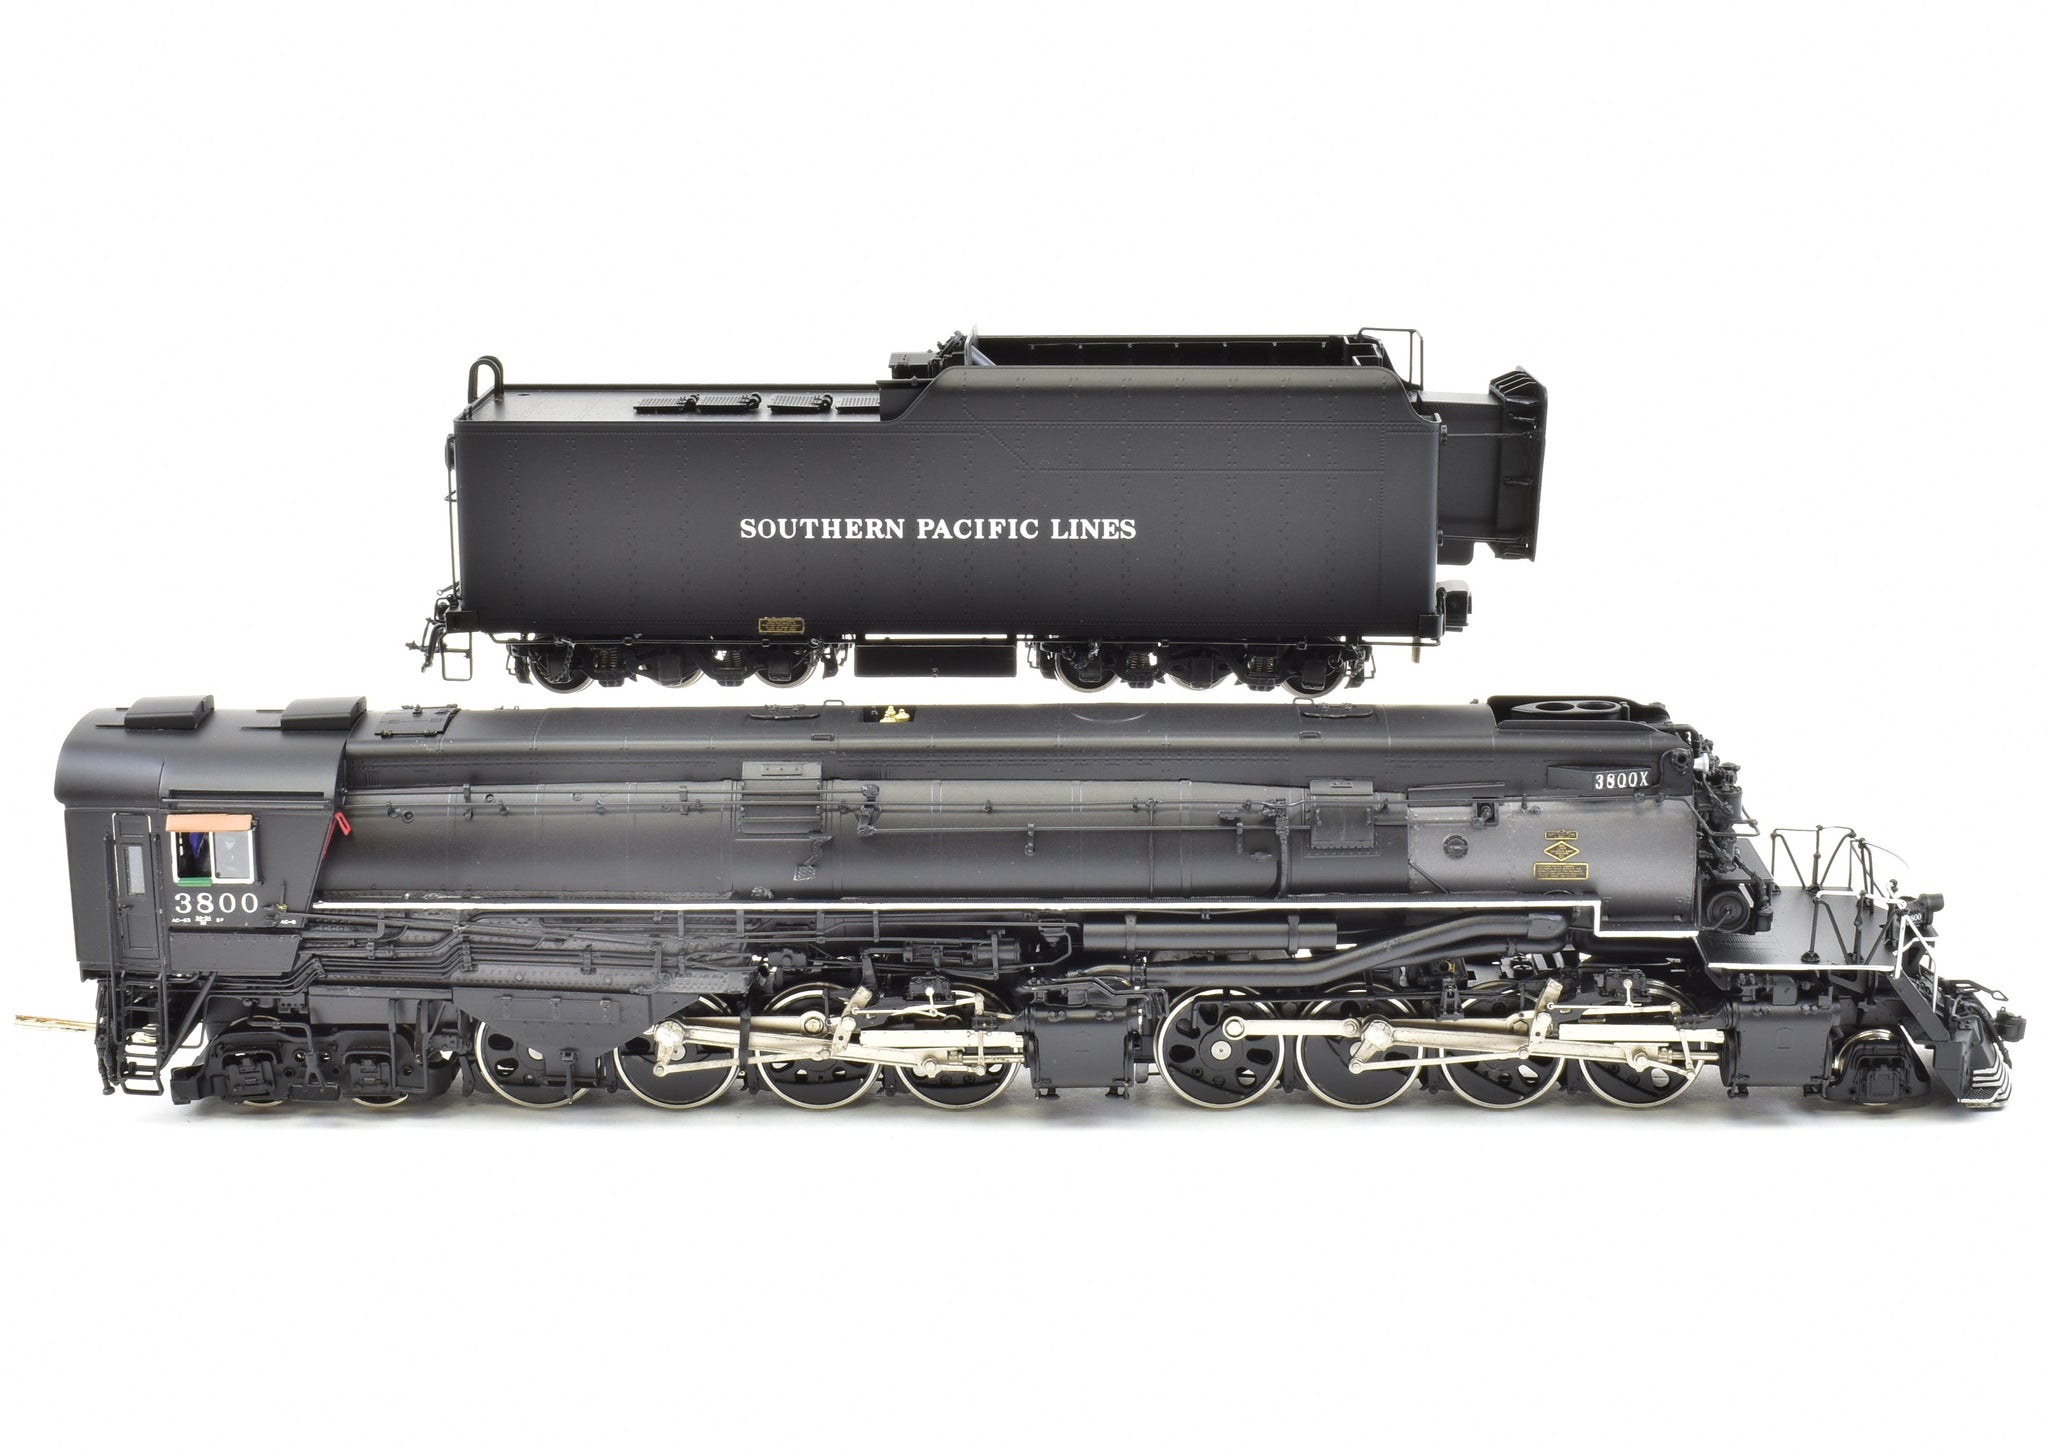 Southern Pacific Class P-8, Locomotive Wiki